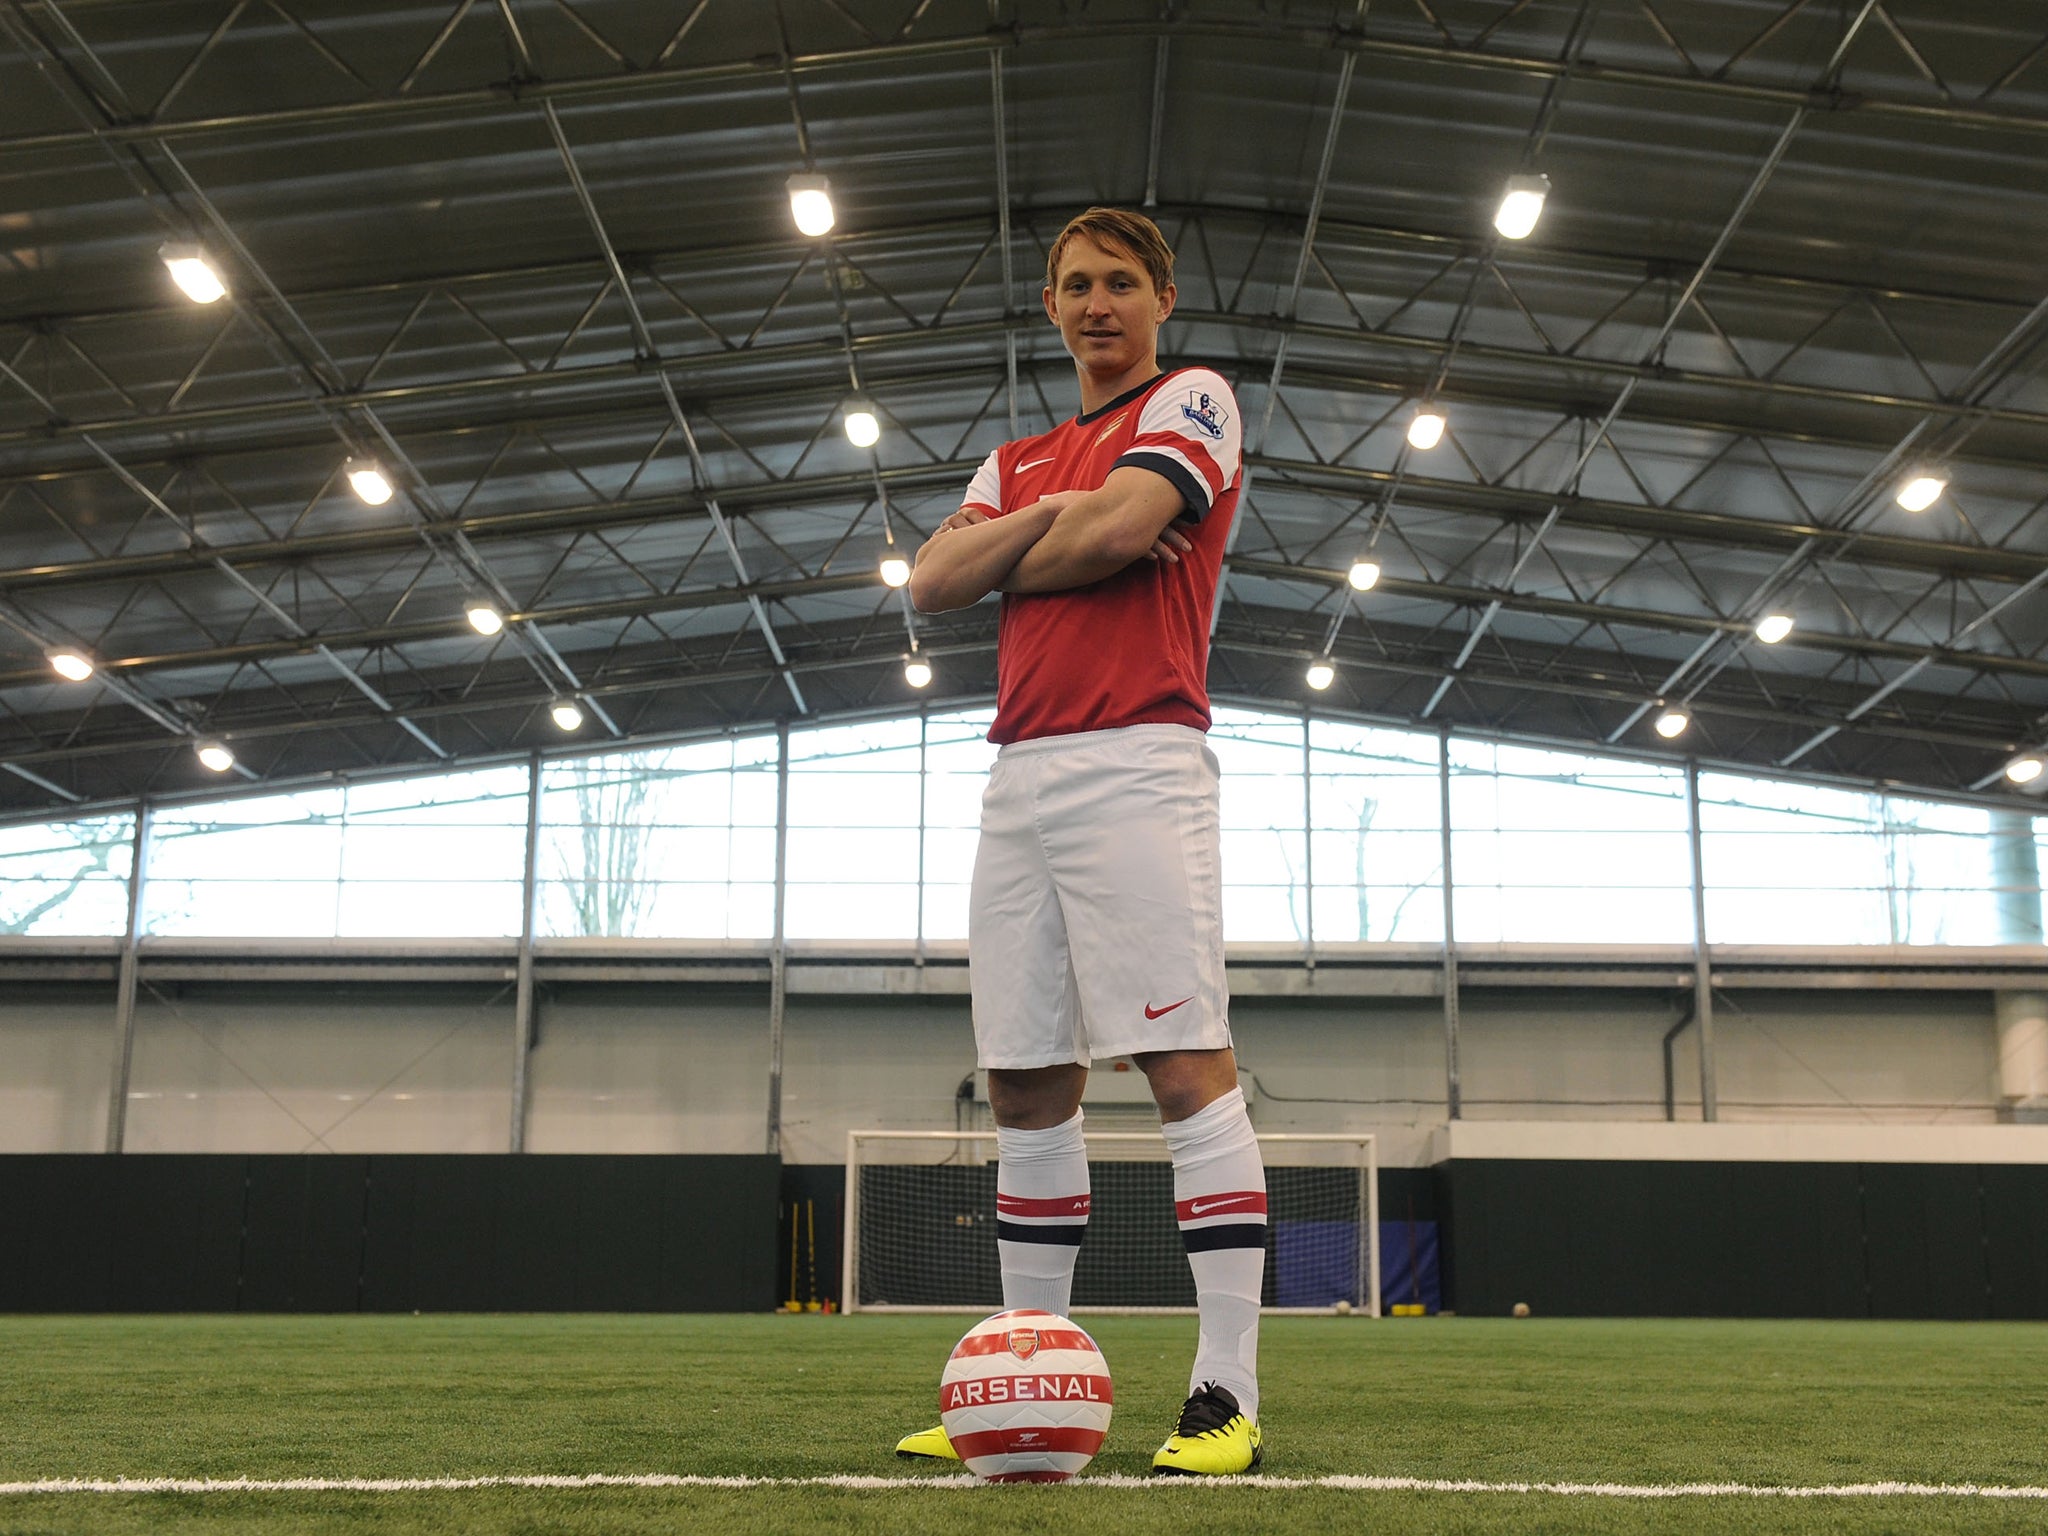 Arsenal unveil their new loan-signing Kim Kallstrom from Spartak Moscow